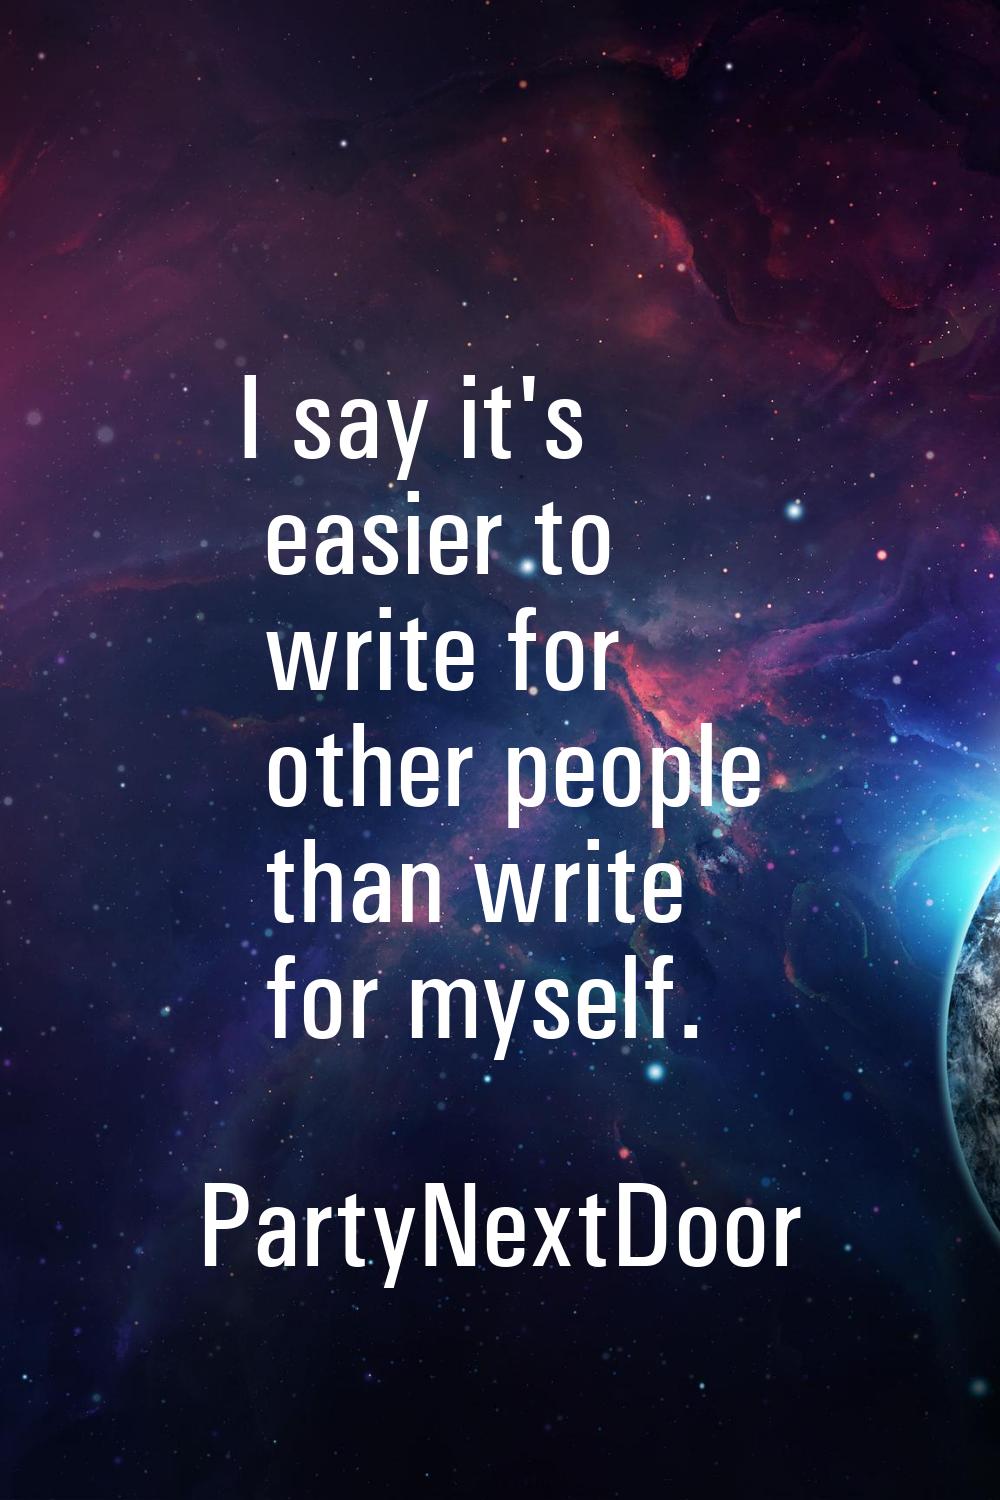 I say it's easier to write for other people than write for myself.